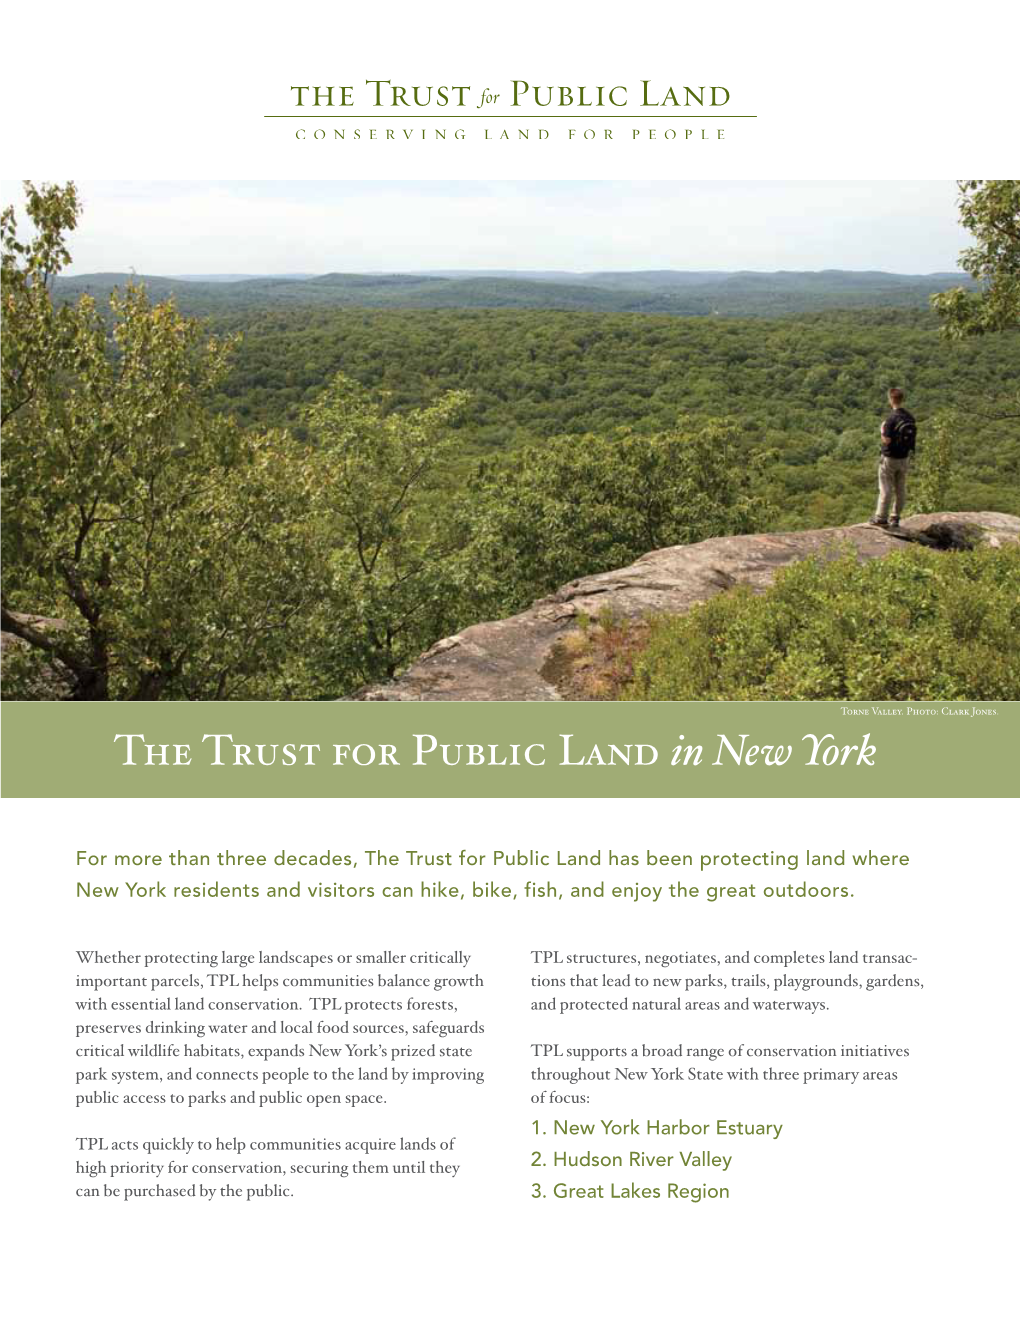 The Trust for Public Land in New York